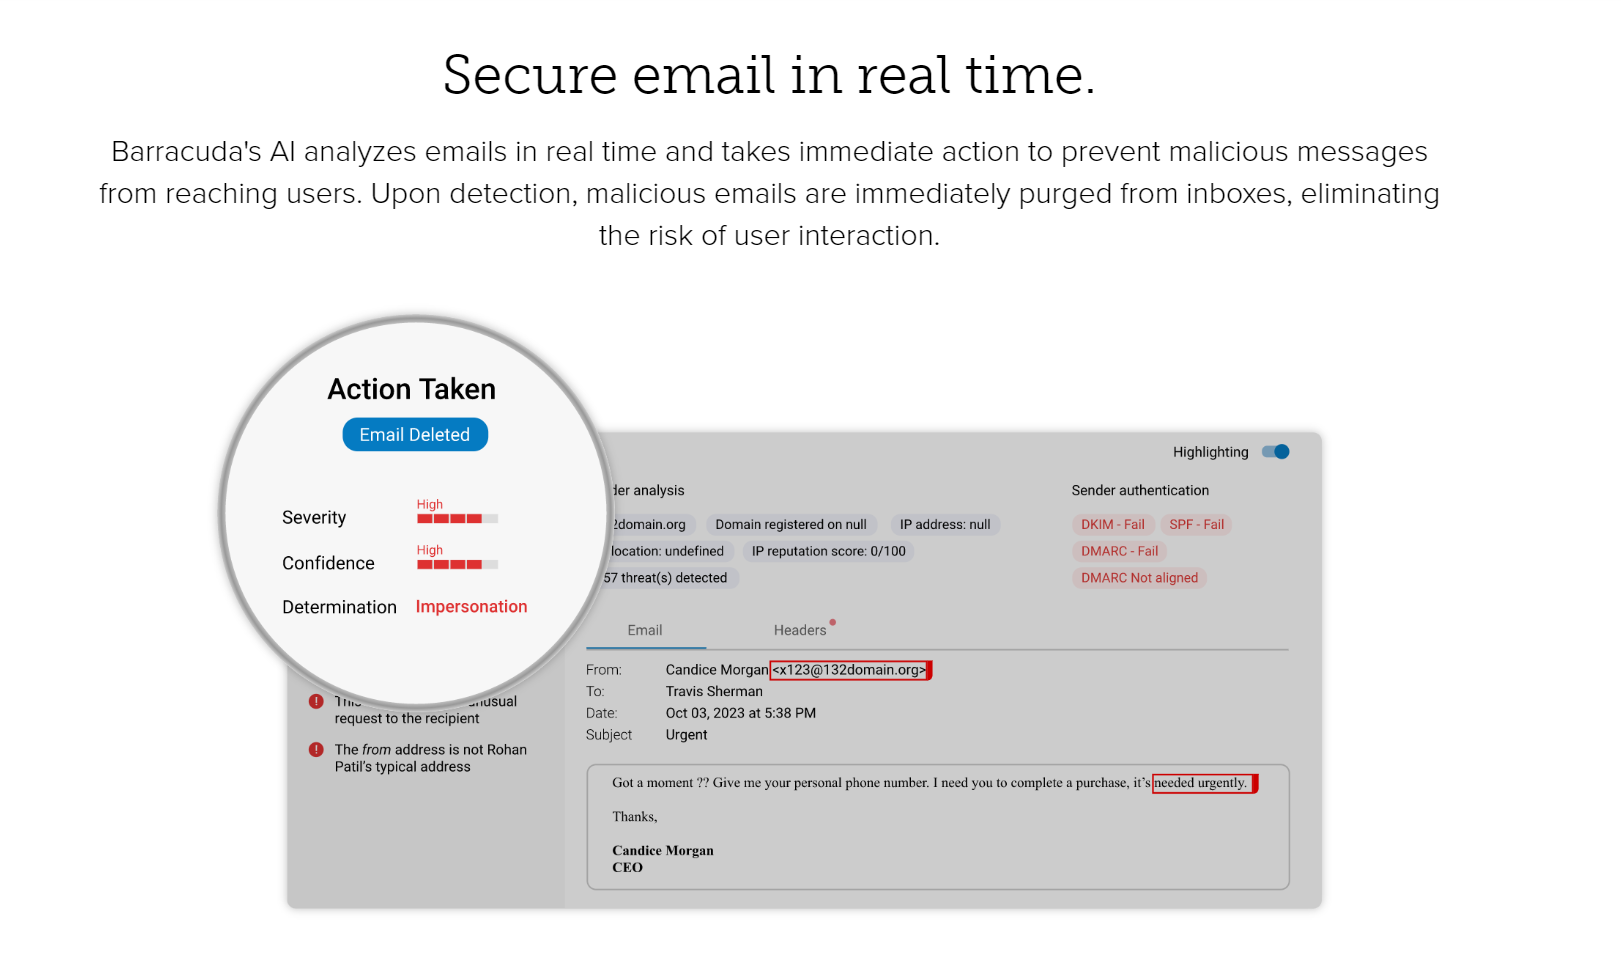 Barracuda's anti-phishing landing page also includes screenshots of the product and UI to show how it helps "secure email in real time."